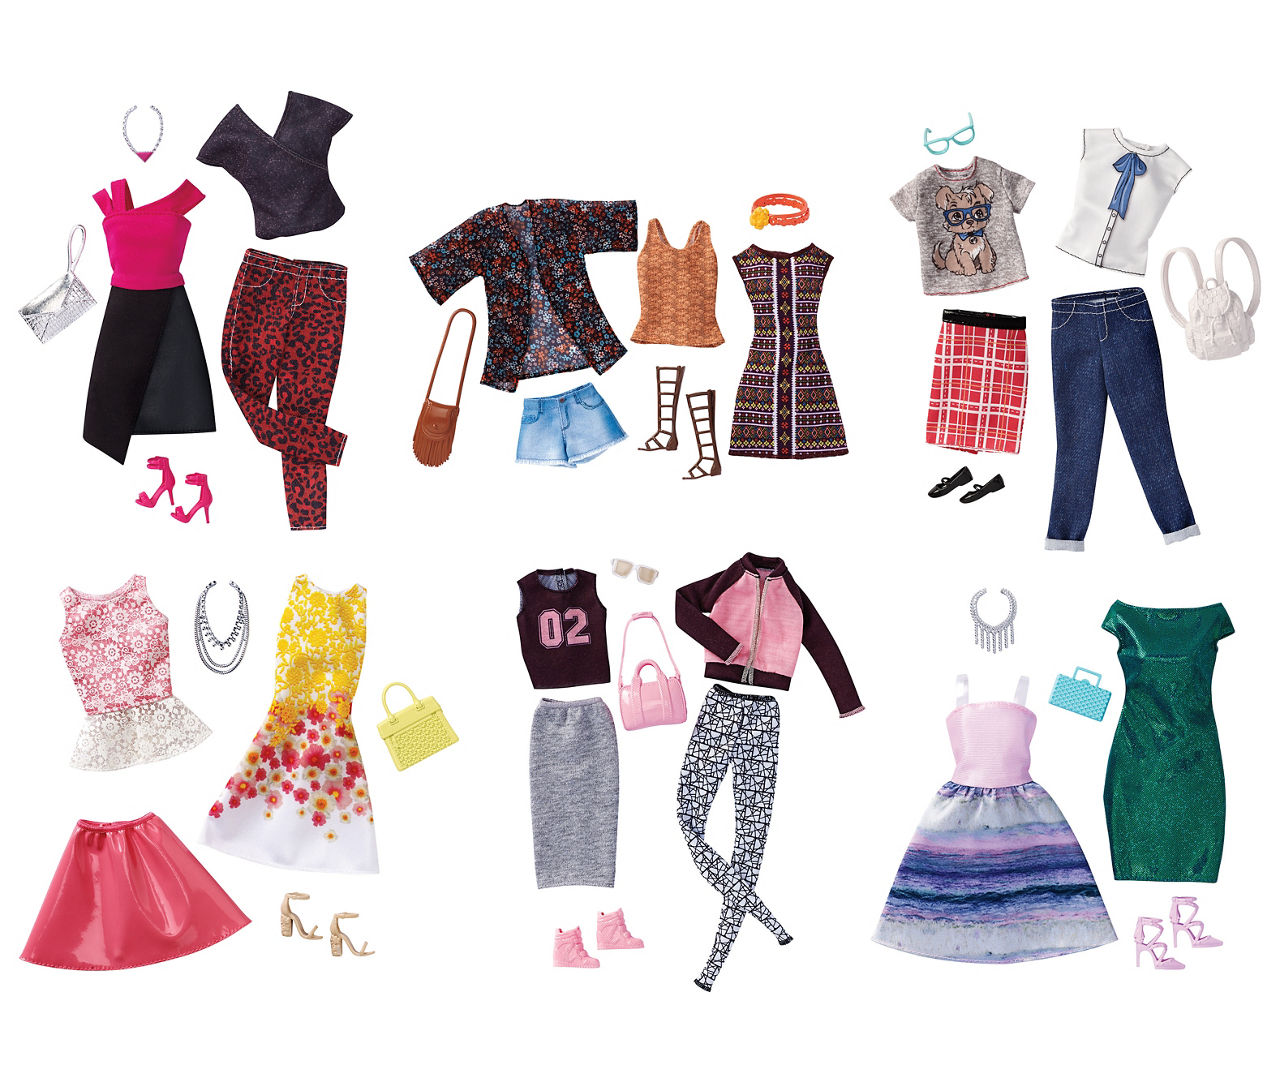 Barbie Fashion 2-Outfits & Accessories - Styles May Vary